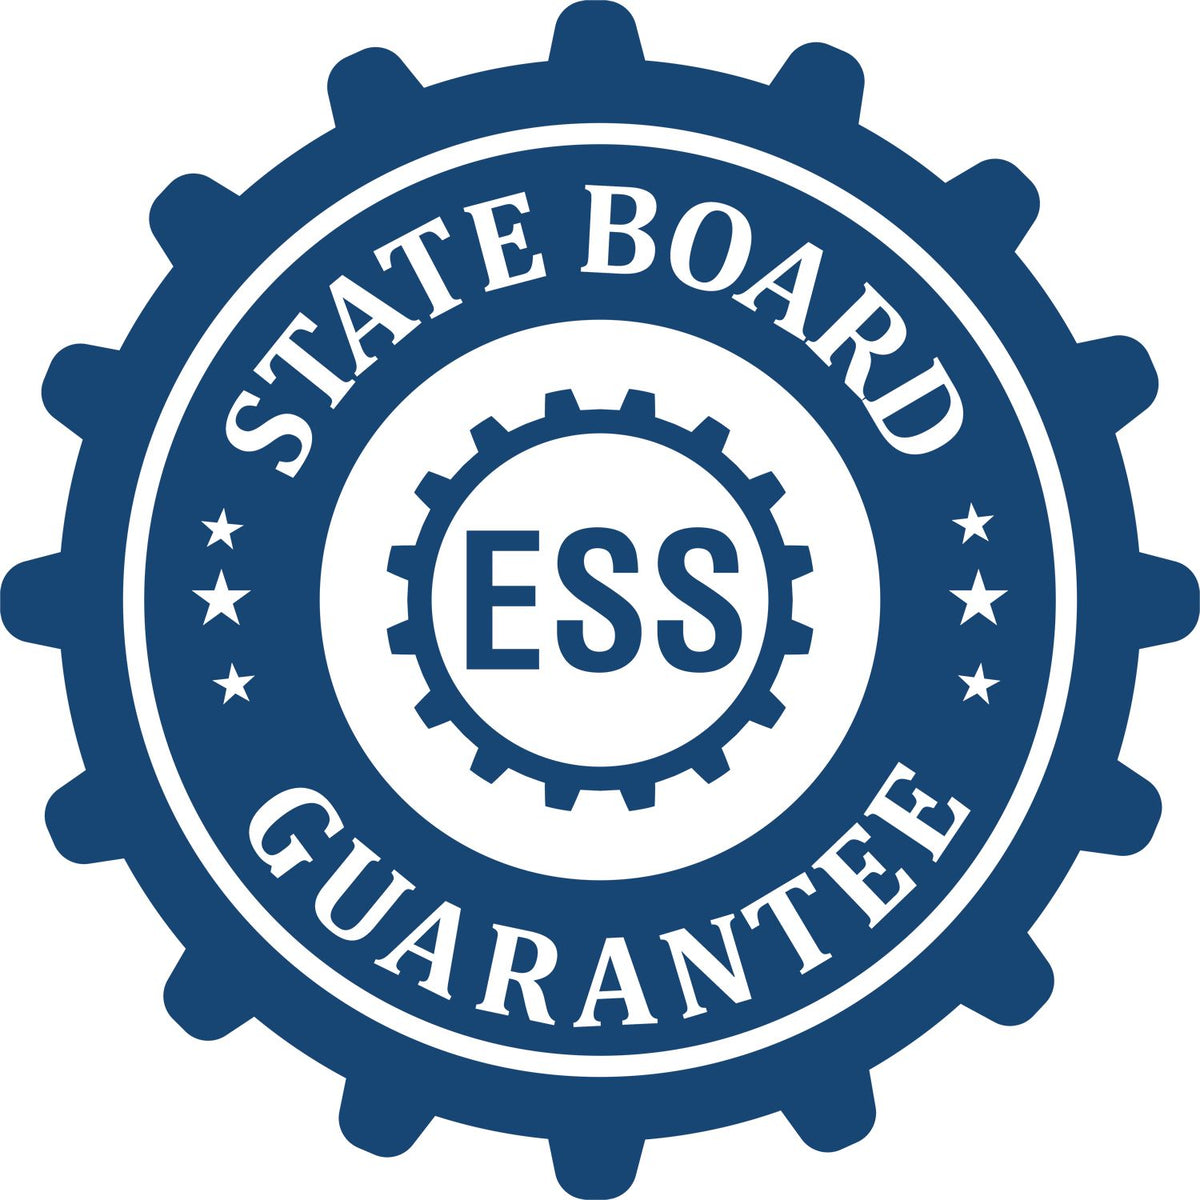 An emblem in a gear shape illustrating a state board guarantee for the Premium MaxLight Pre-Inked Idaho Engineering Stamp product.